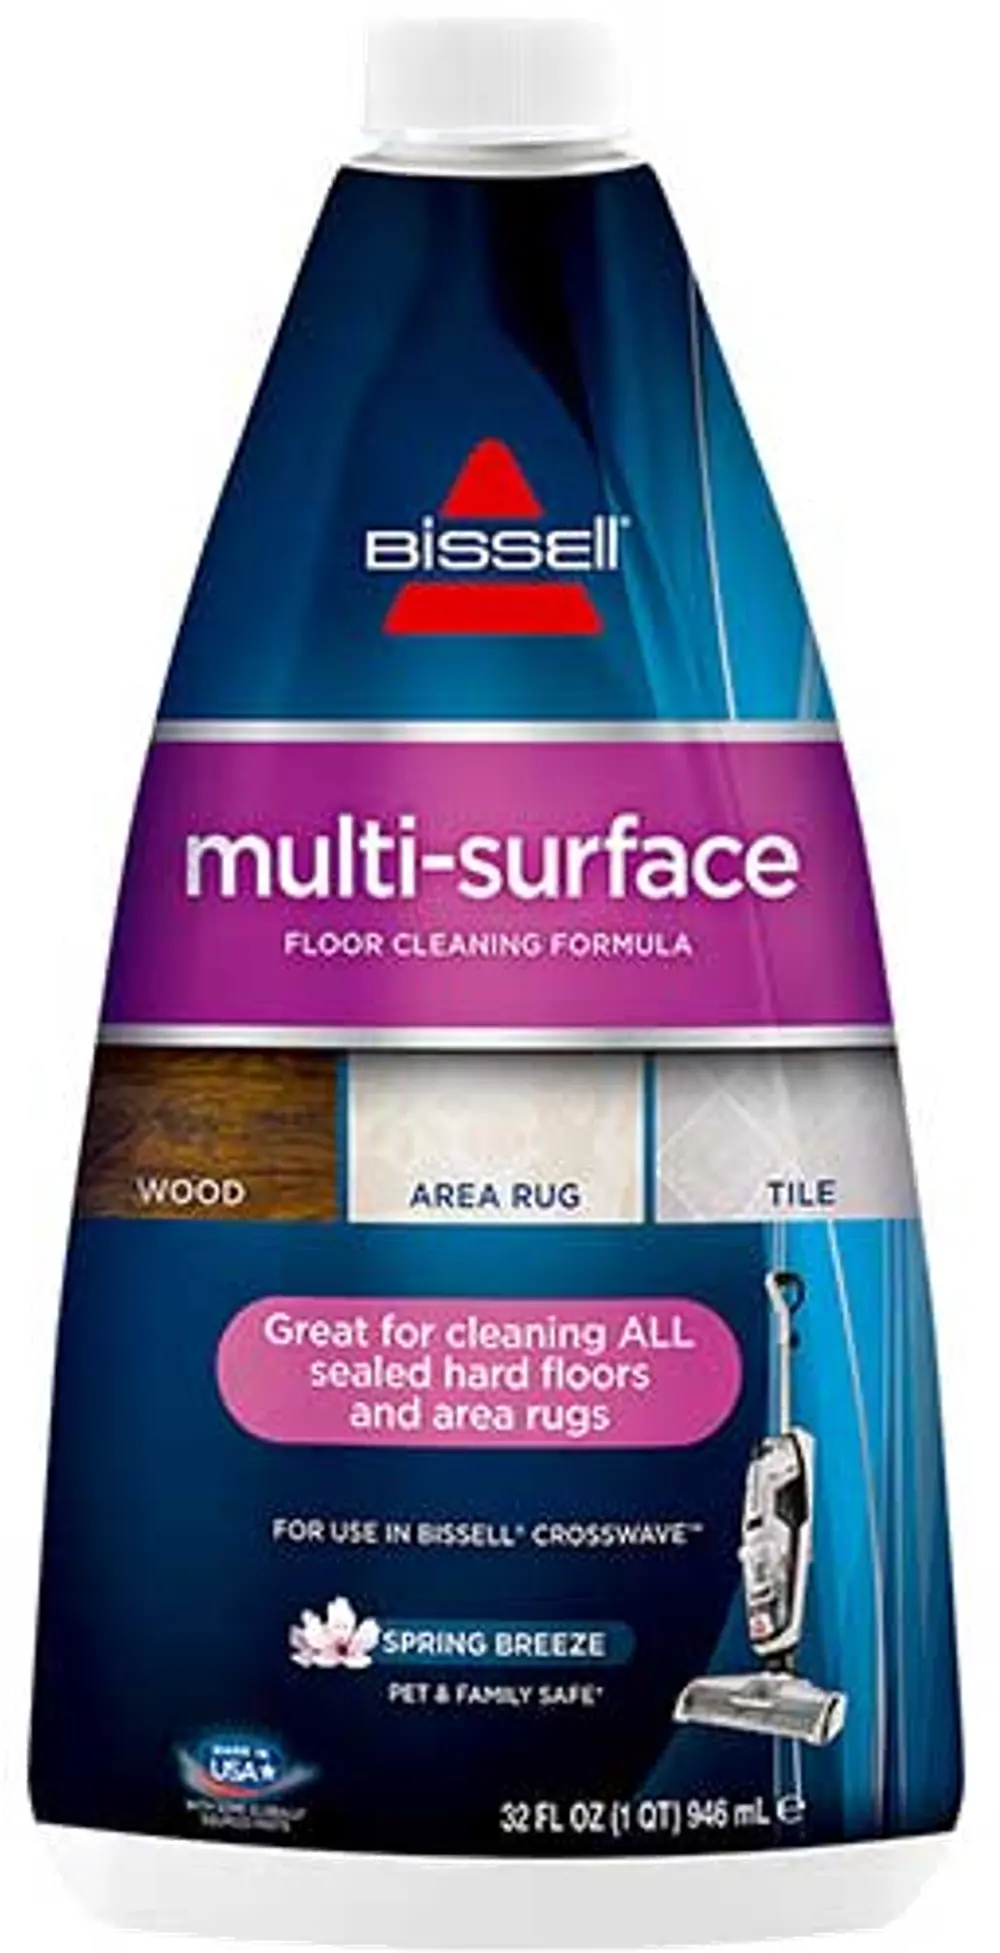 1789/MULIT-SURFACE Bissell CrossWave All-in-One Multi-Surface Cleaner-1